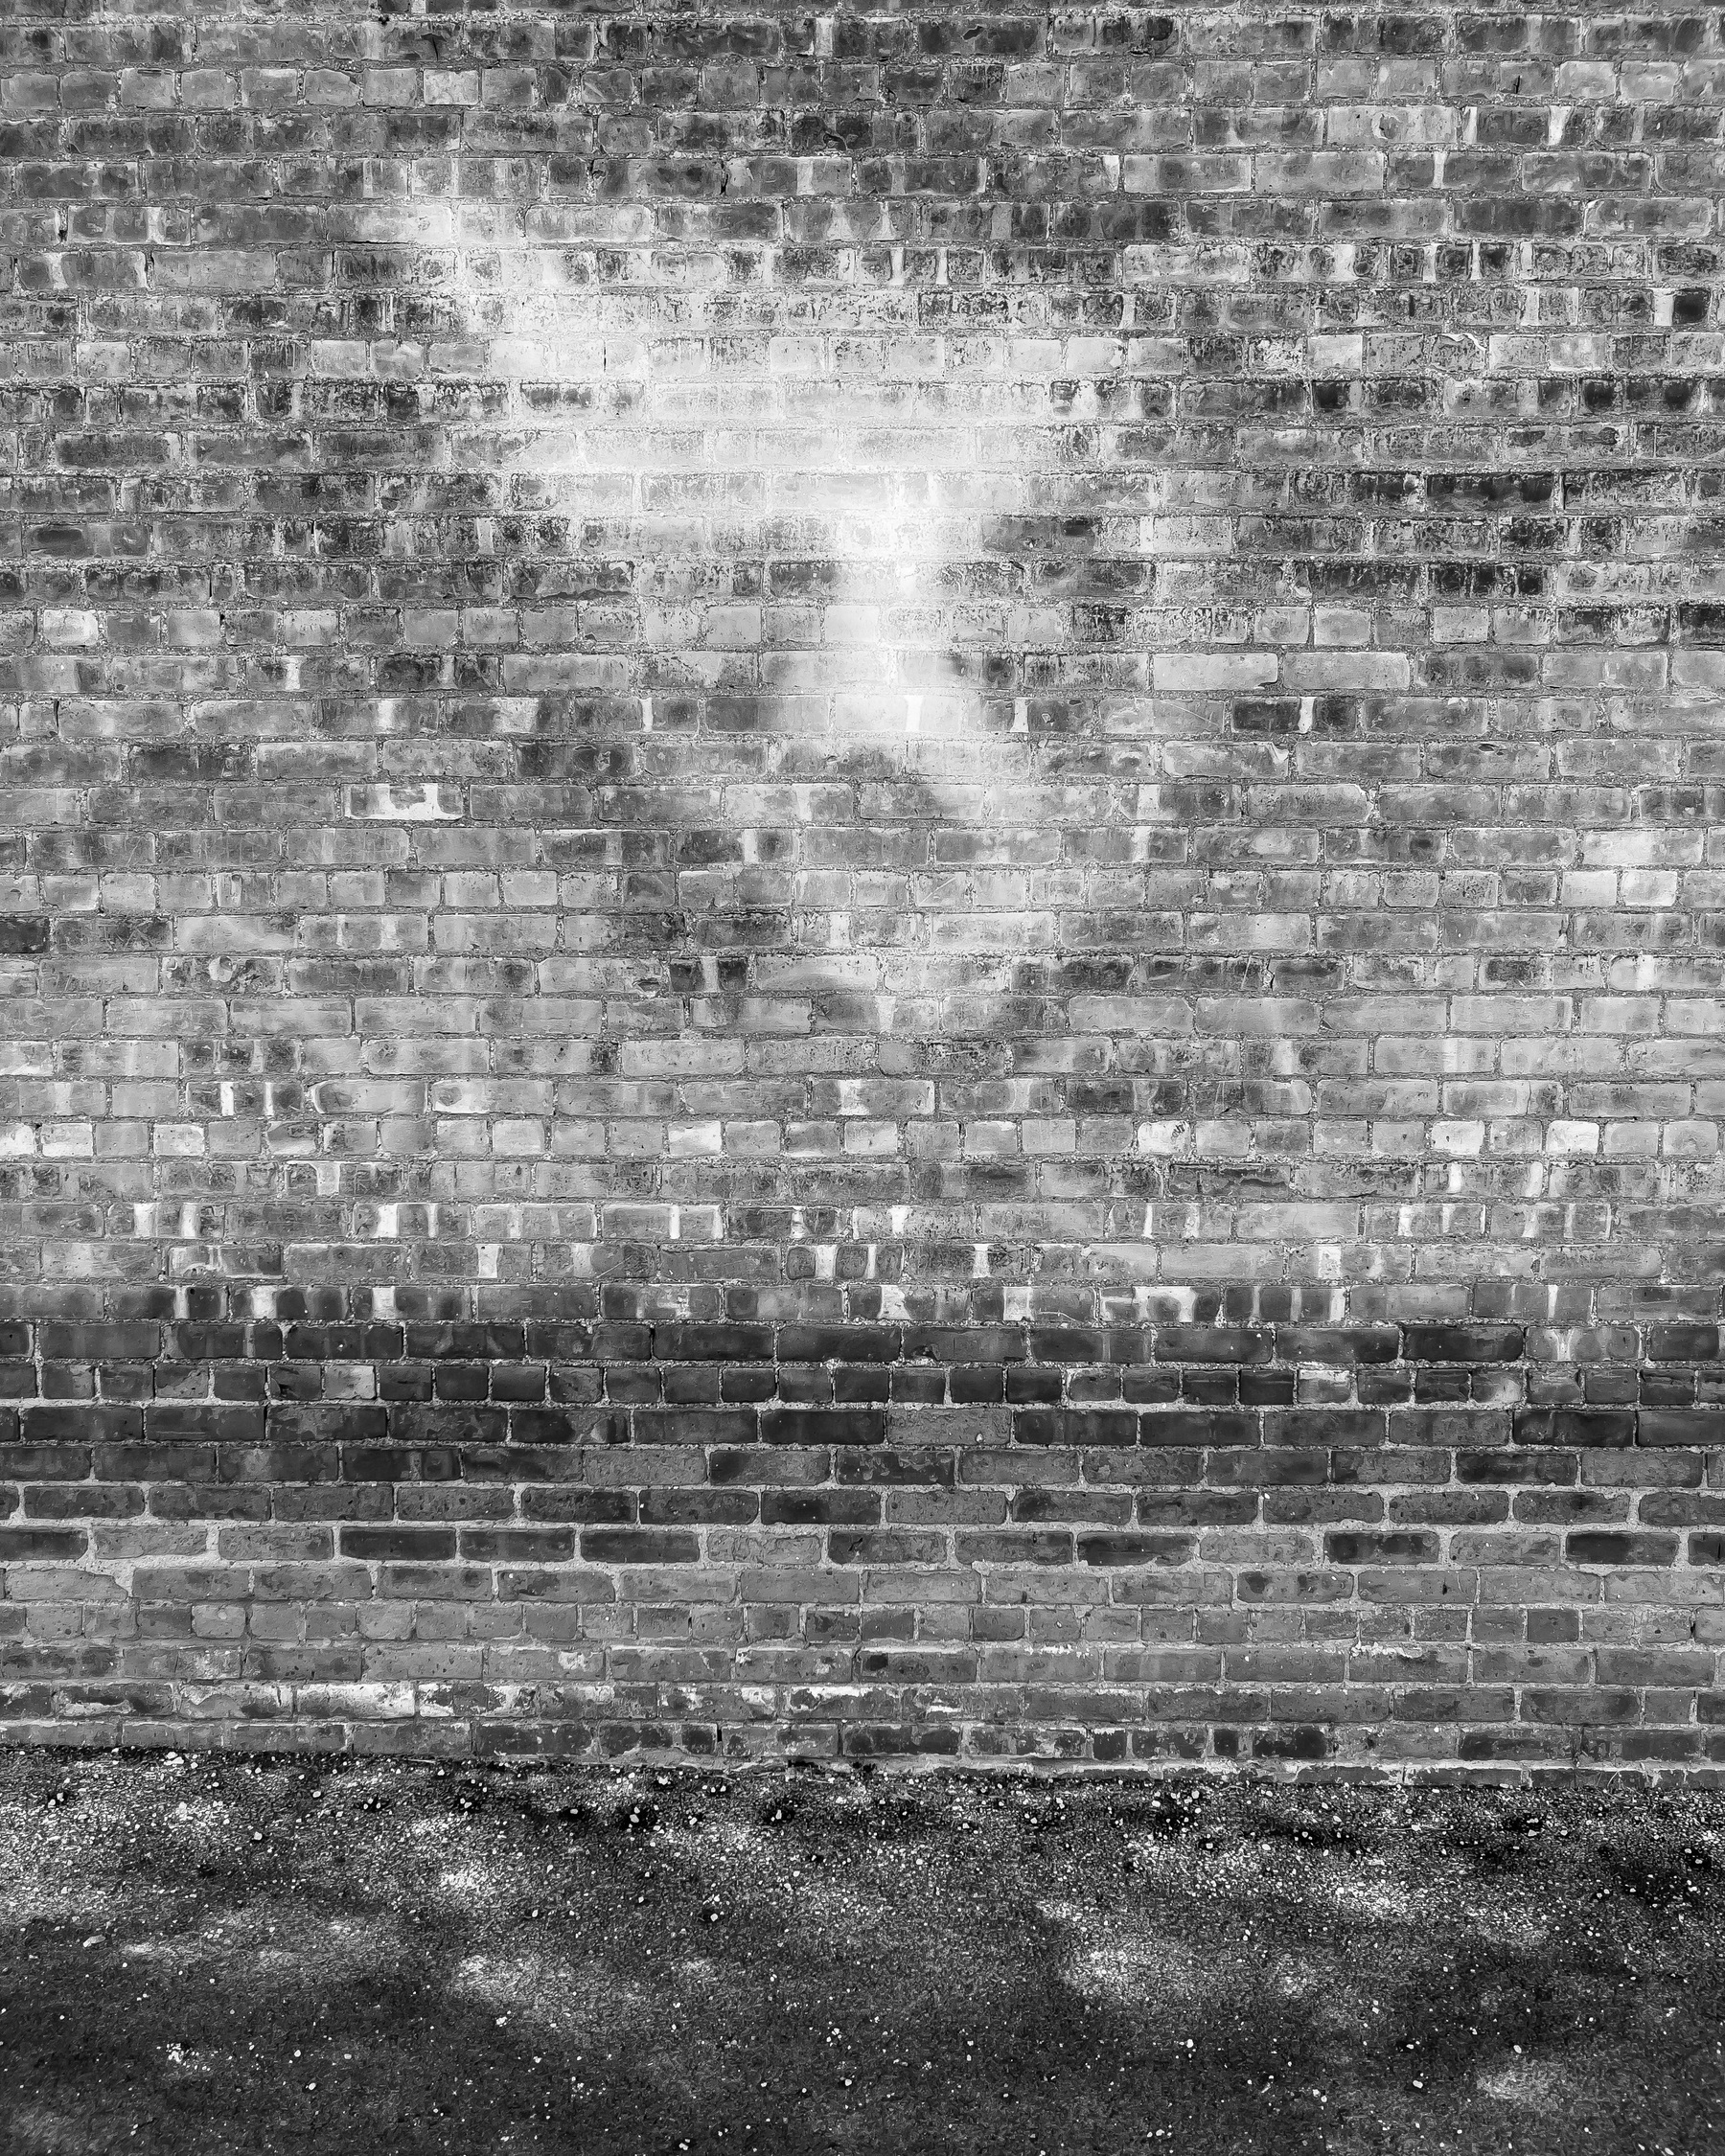 Face on brick wall created by reflected sunlight.